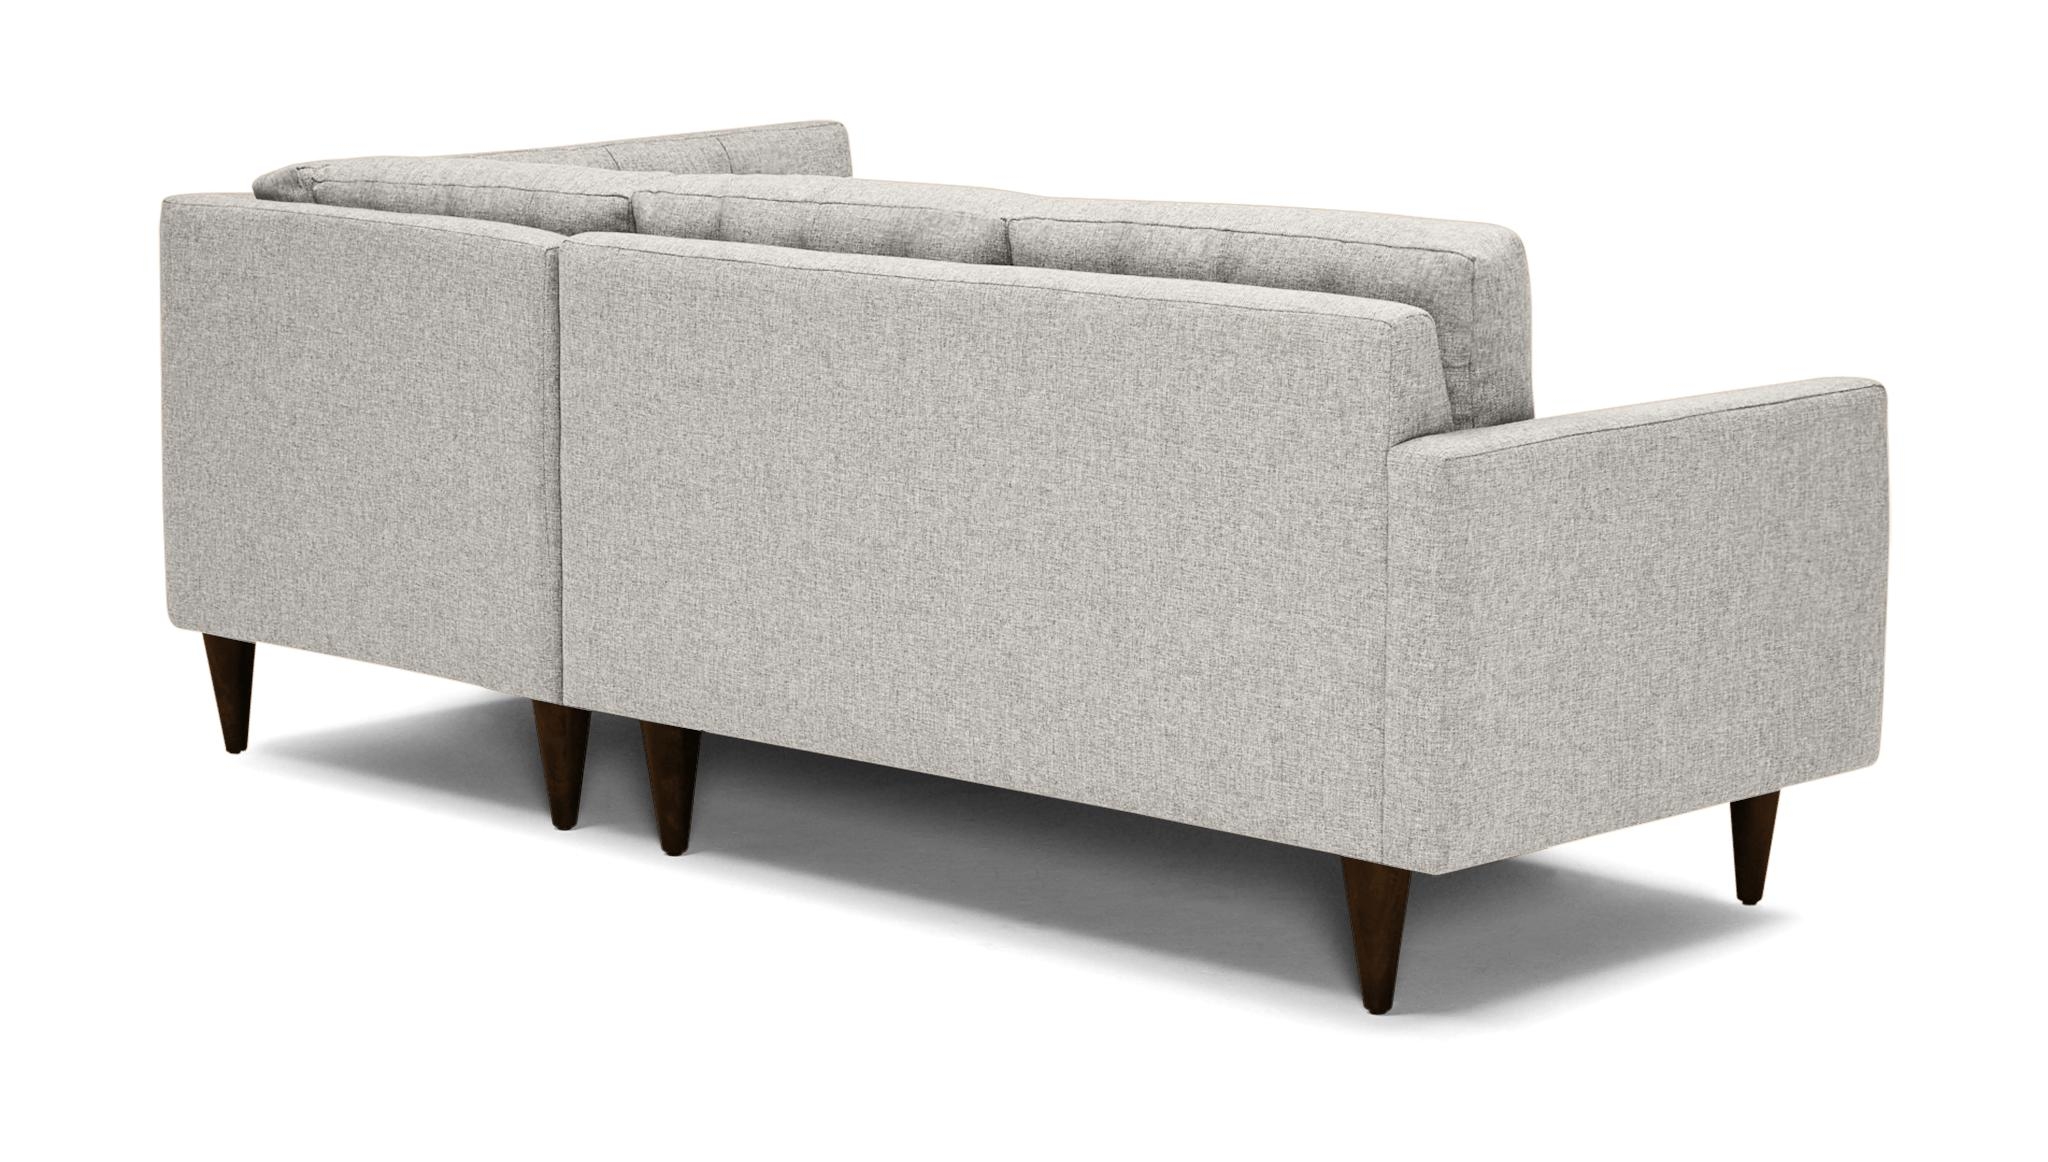 White Eliot Mid Century Modern Apartment Sectional with Bumper - Tussah Snow - Mocha - Right  - Image 2